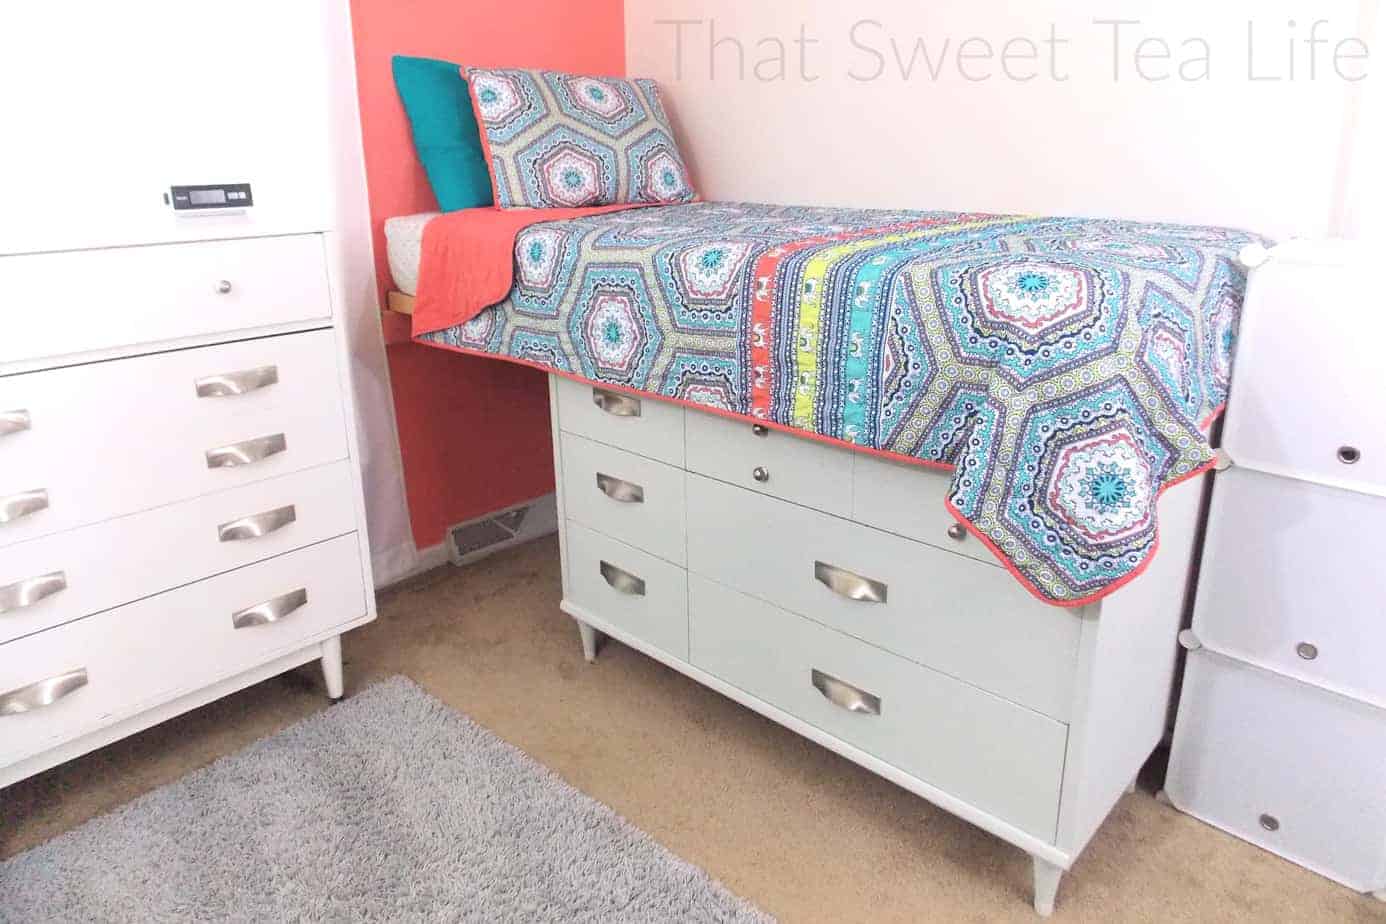 How To Make Beds With Storage, Twin Bed With Drawers Underneath